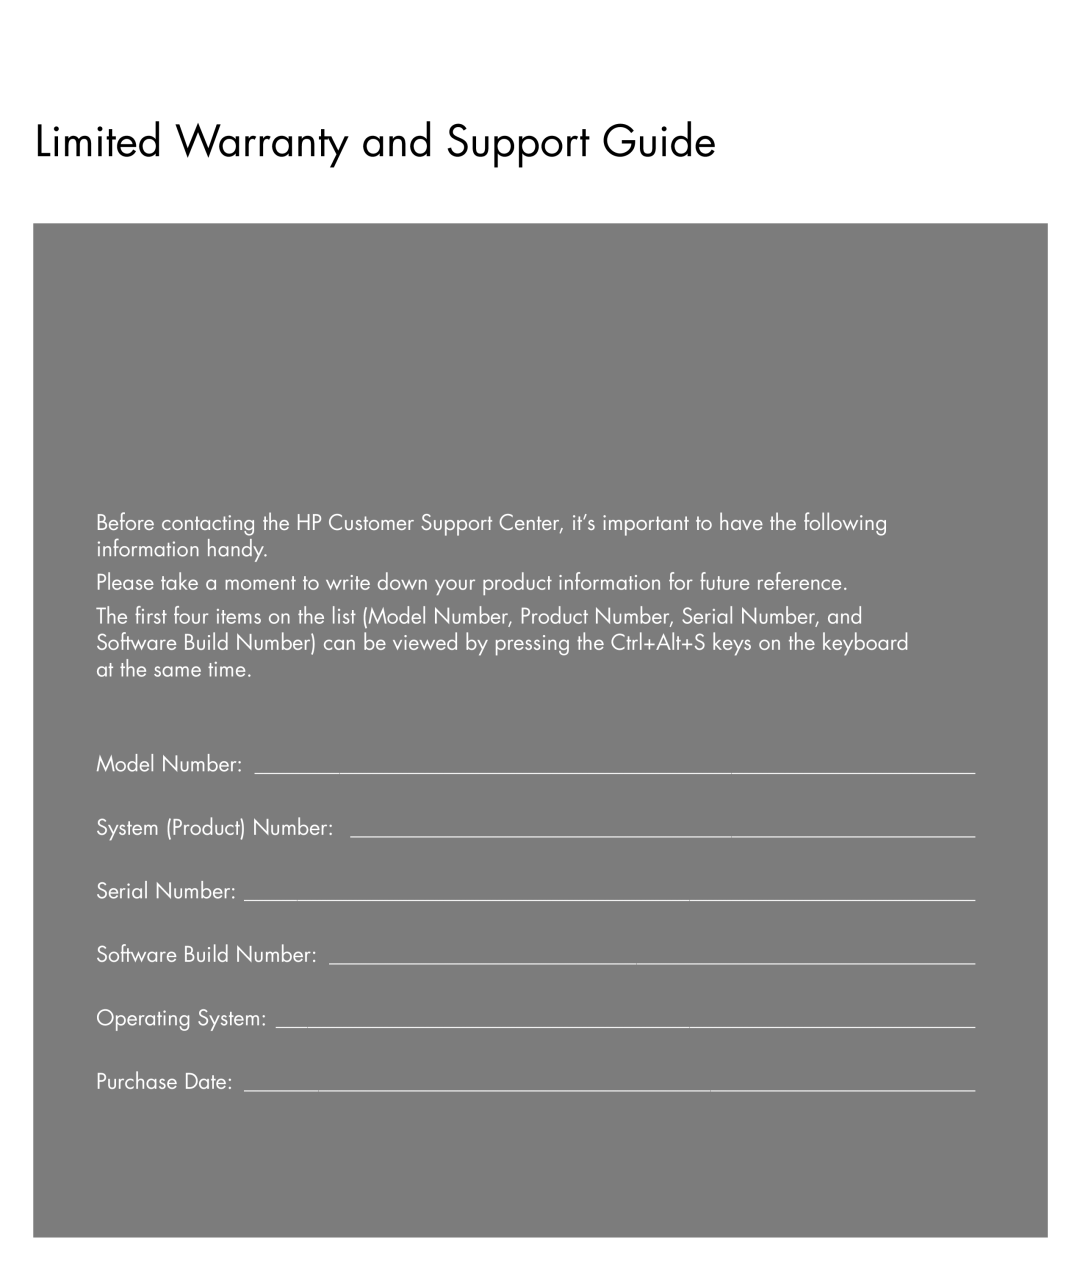 HP SR2002X, a1644x, SR2010NX, SR2001NX, SR2006NX, SR2014HM, SR2011WM, SR2044NX, SR2041X manual Limited Warranty and Support Guide 